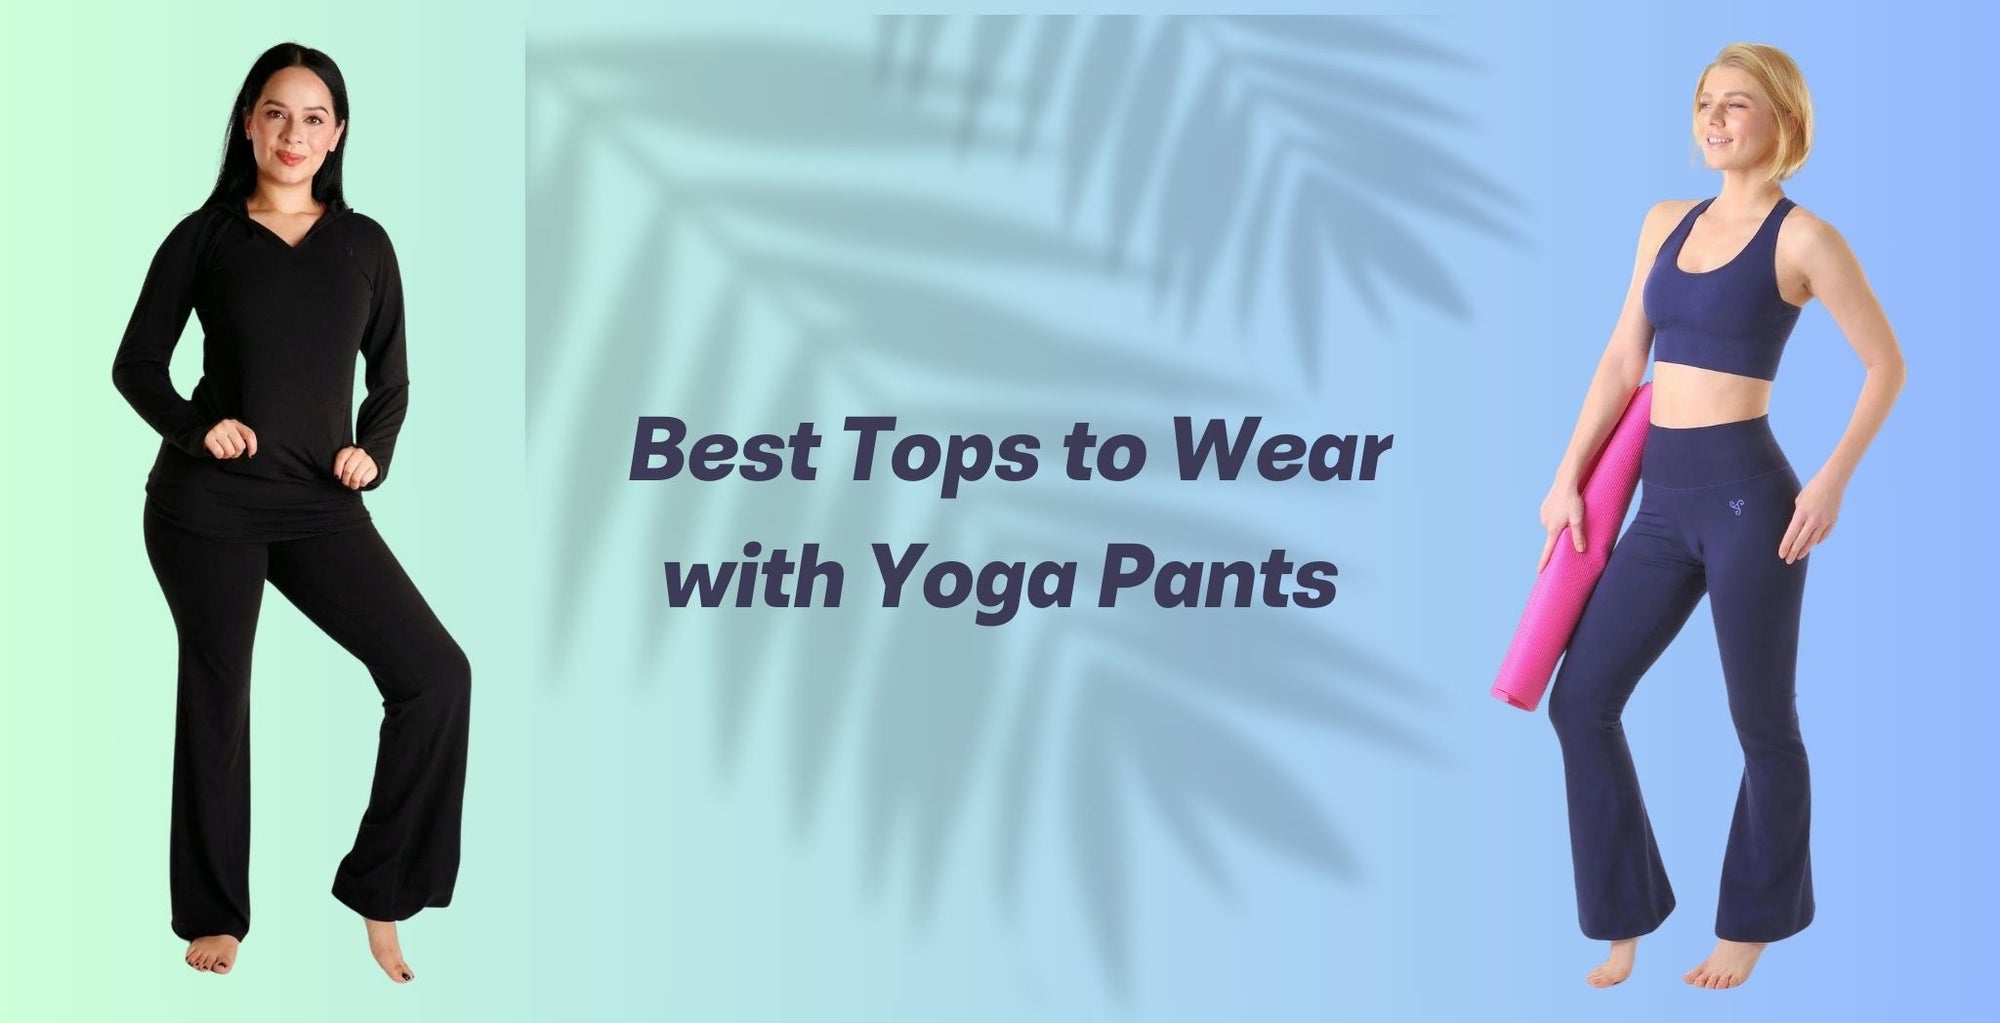 : Best Tops to Wear with Yoga Pants